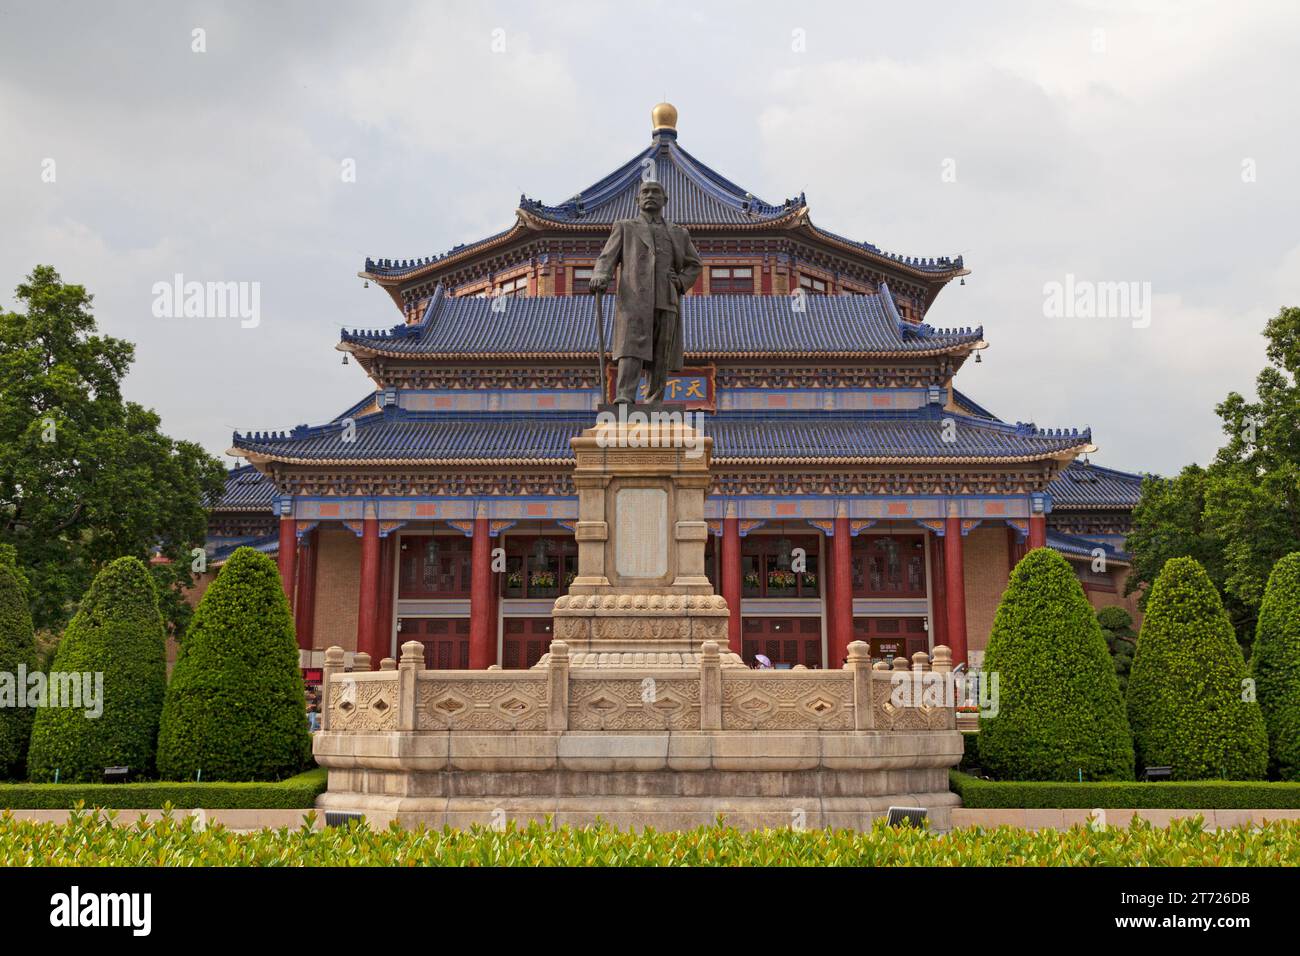 The Sun Yat-sen or Zhongshan Memorial Hall is an octagon-shaped building in Guangzhou, capital of China's Guangdong Province. The hall was designed by Stock Photo